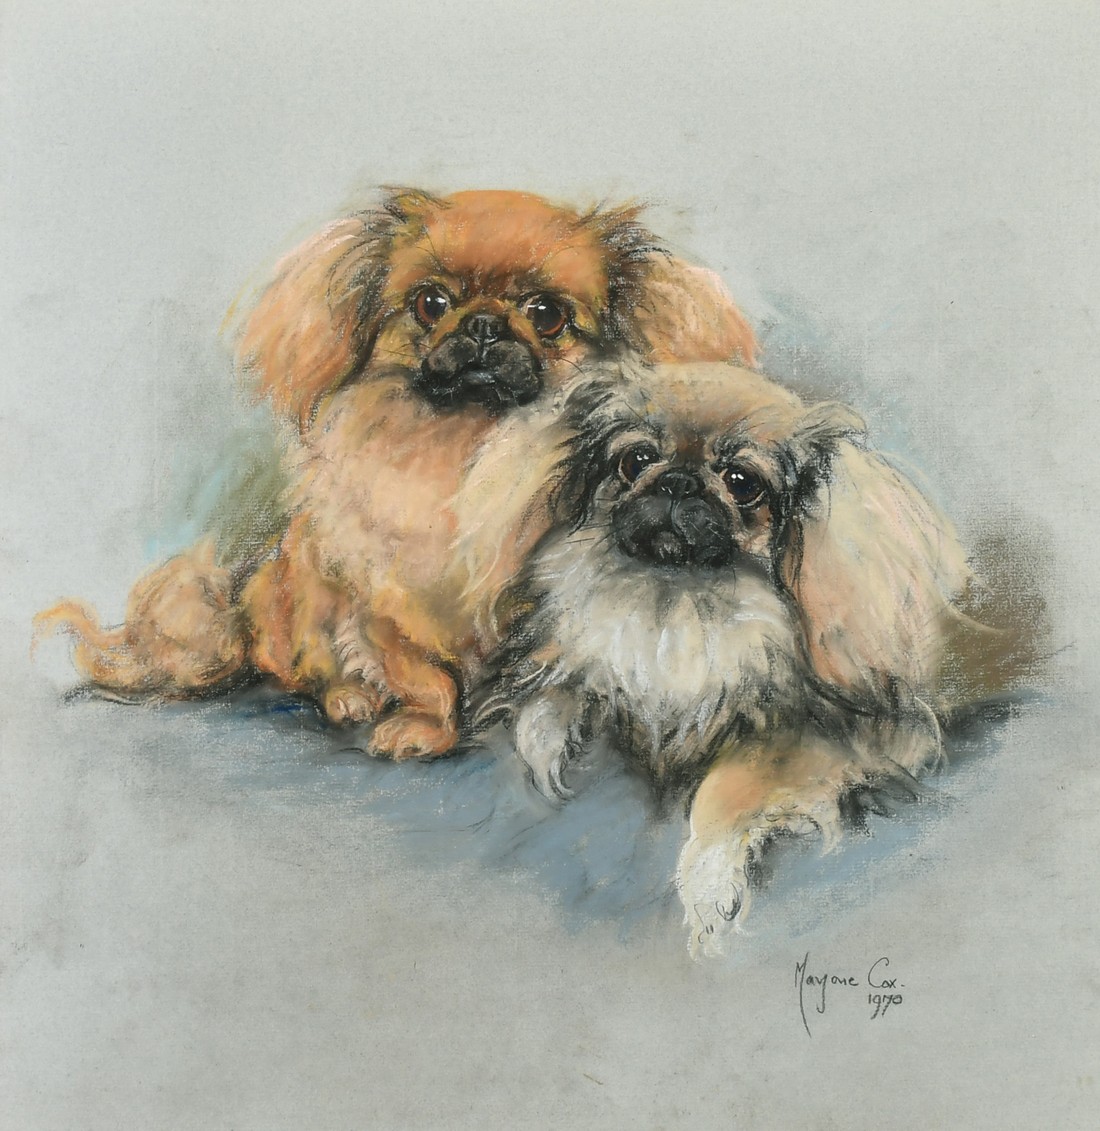 Marjorie Cox (1915-2003) British, a portrait study of two Pekingese, pastel, signed and dated